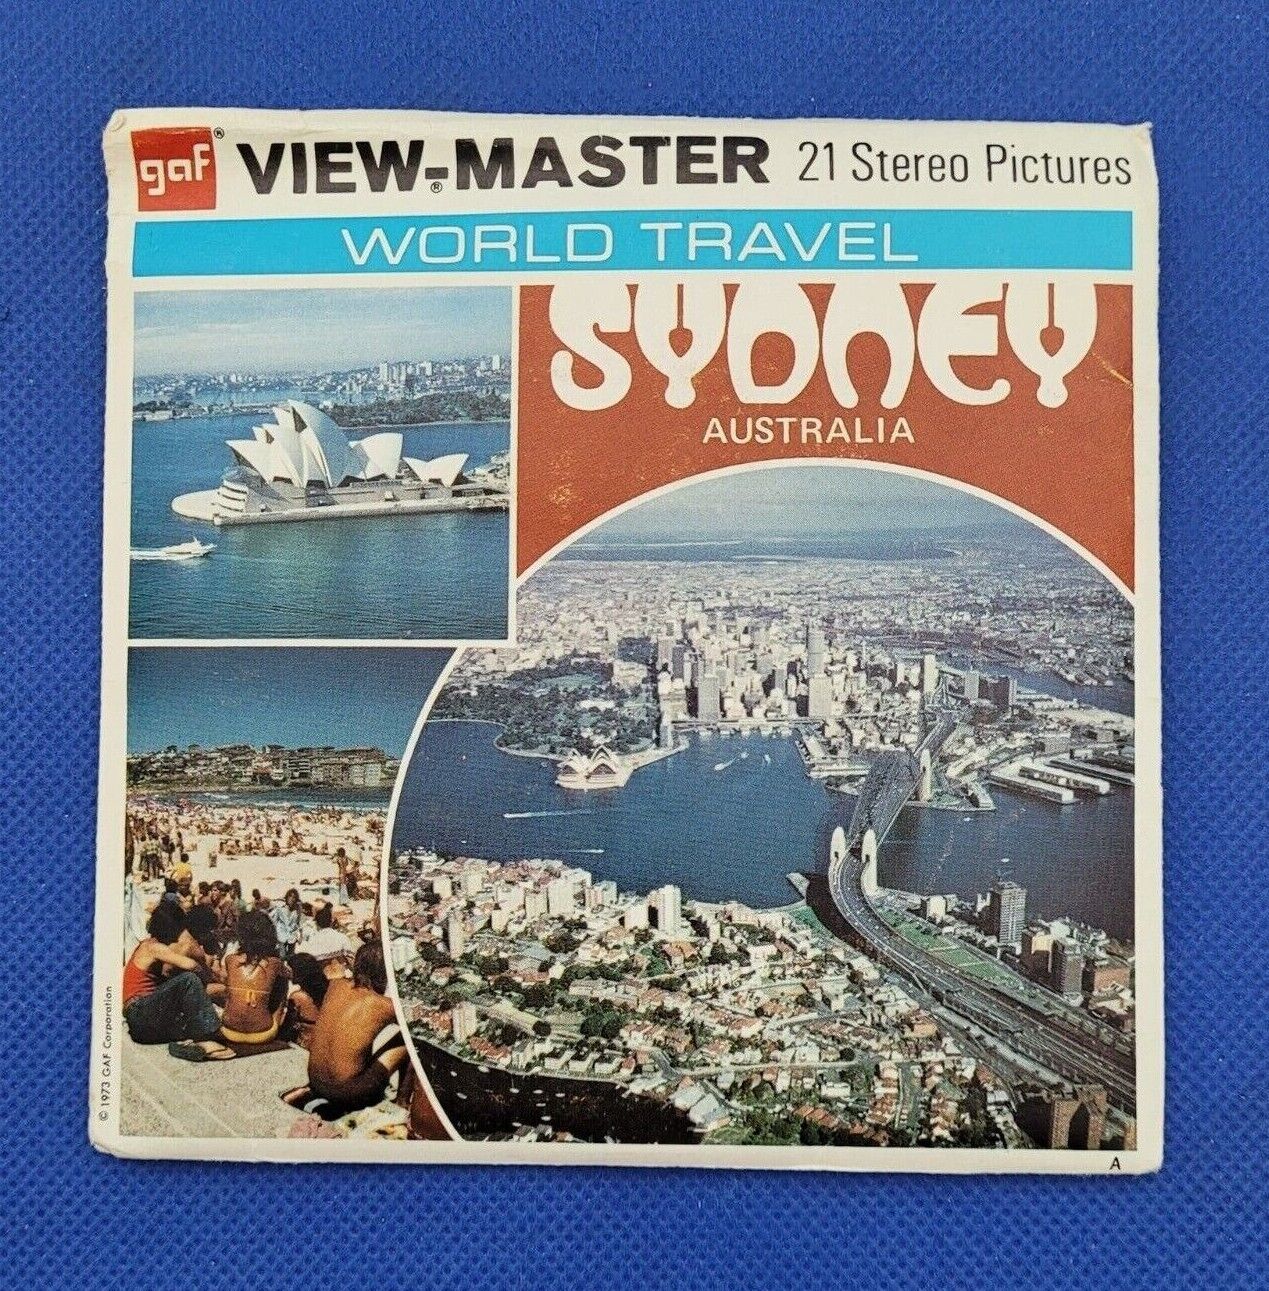 COLOR Gaf B286 Sydney New South Wales Australia view-master 3 Reels Packet